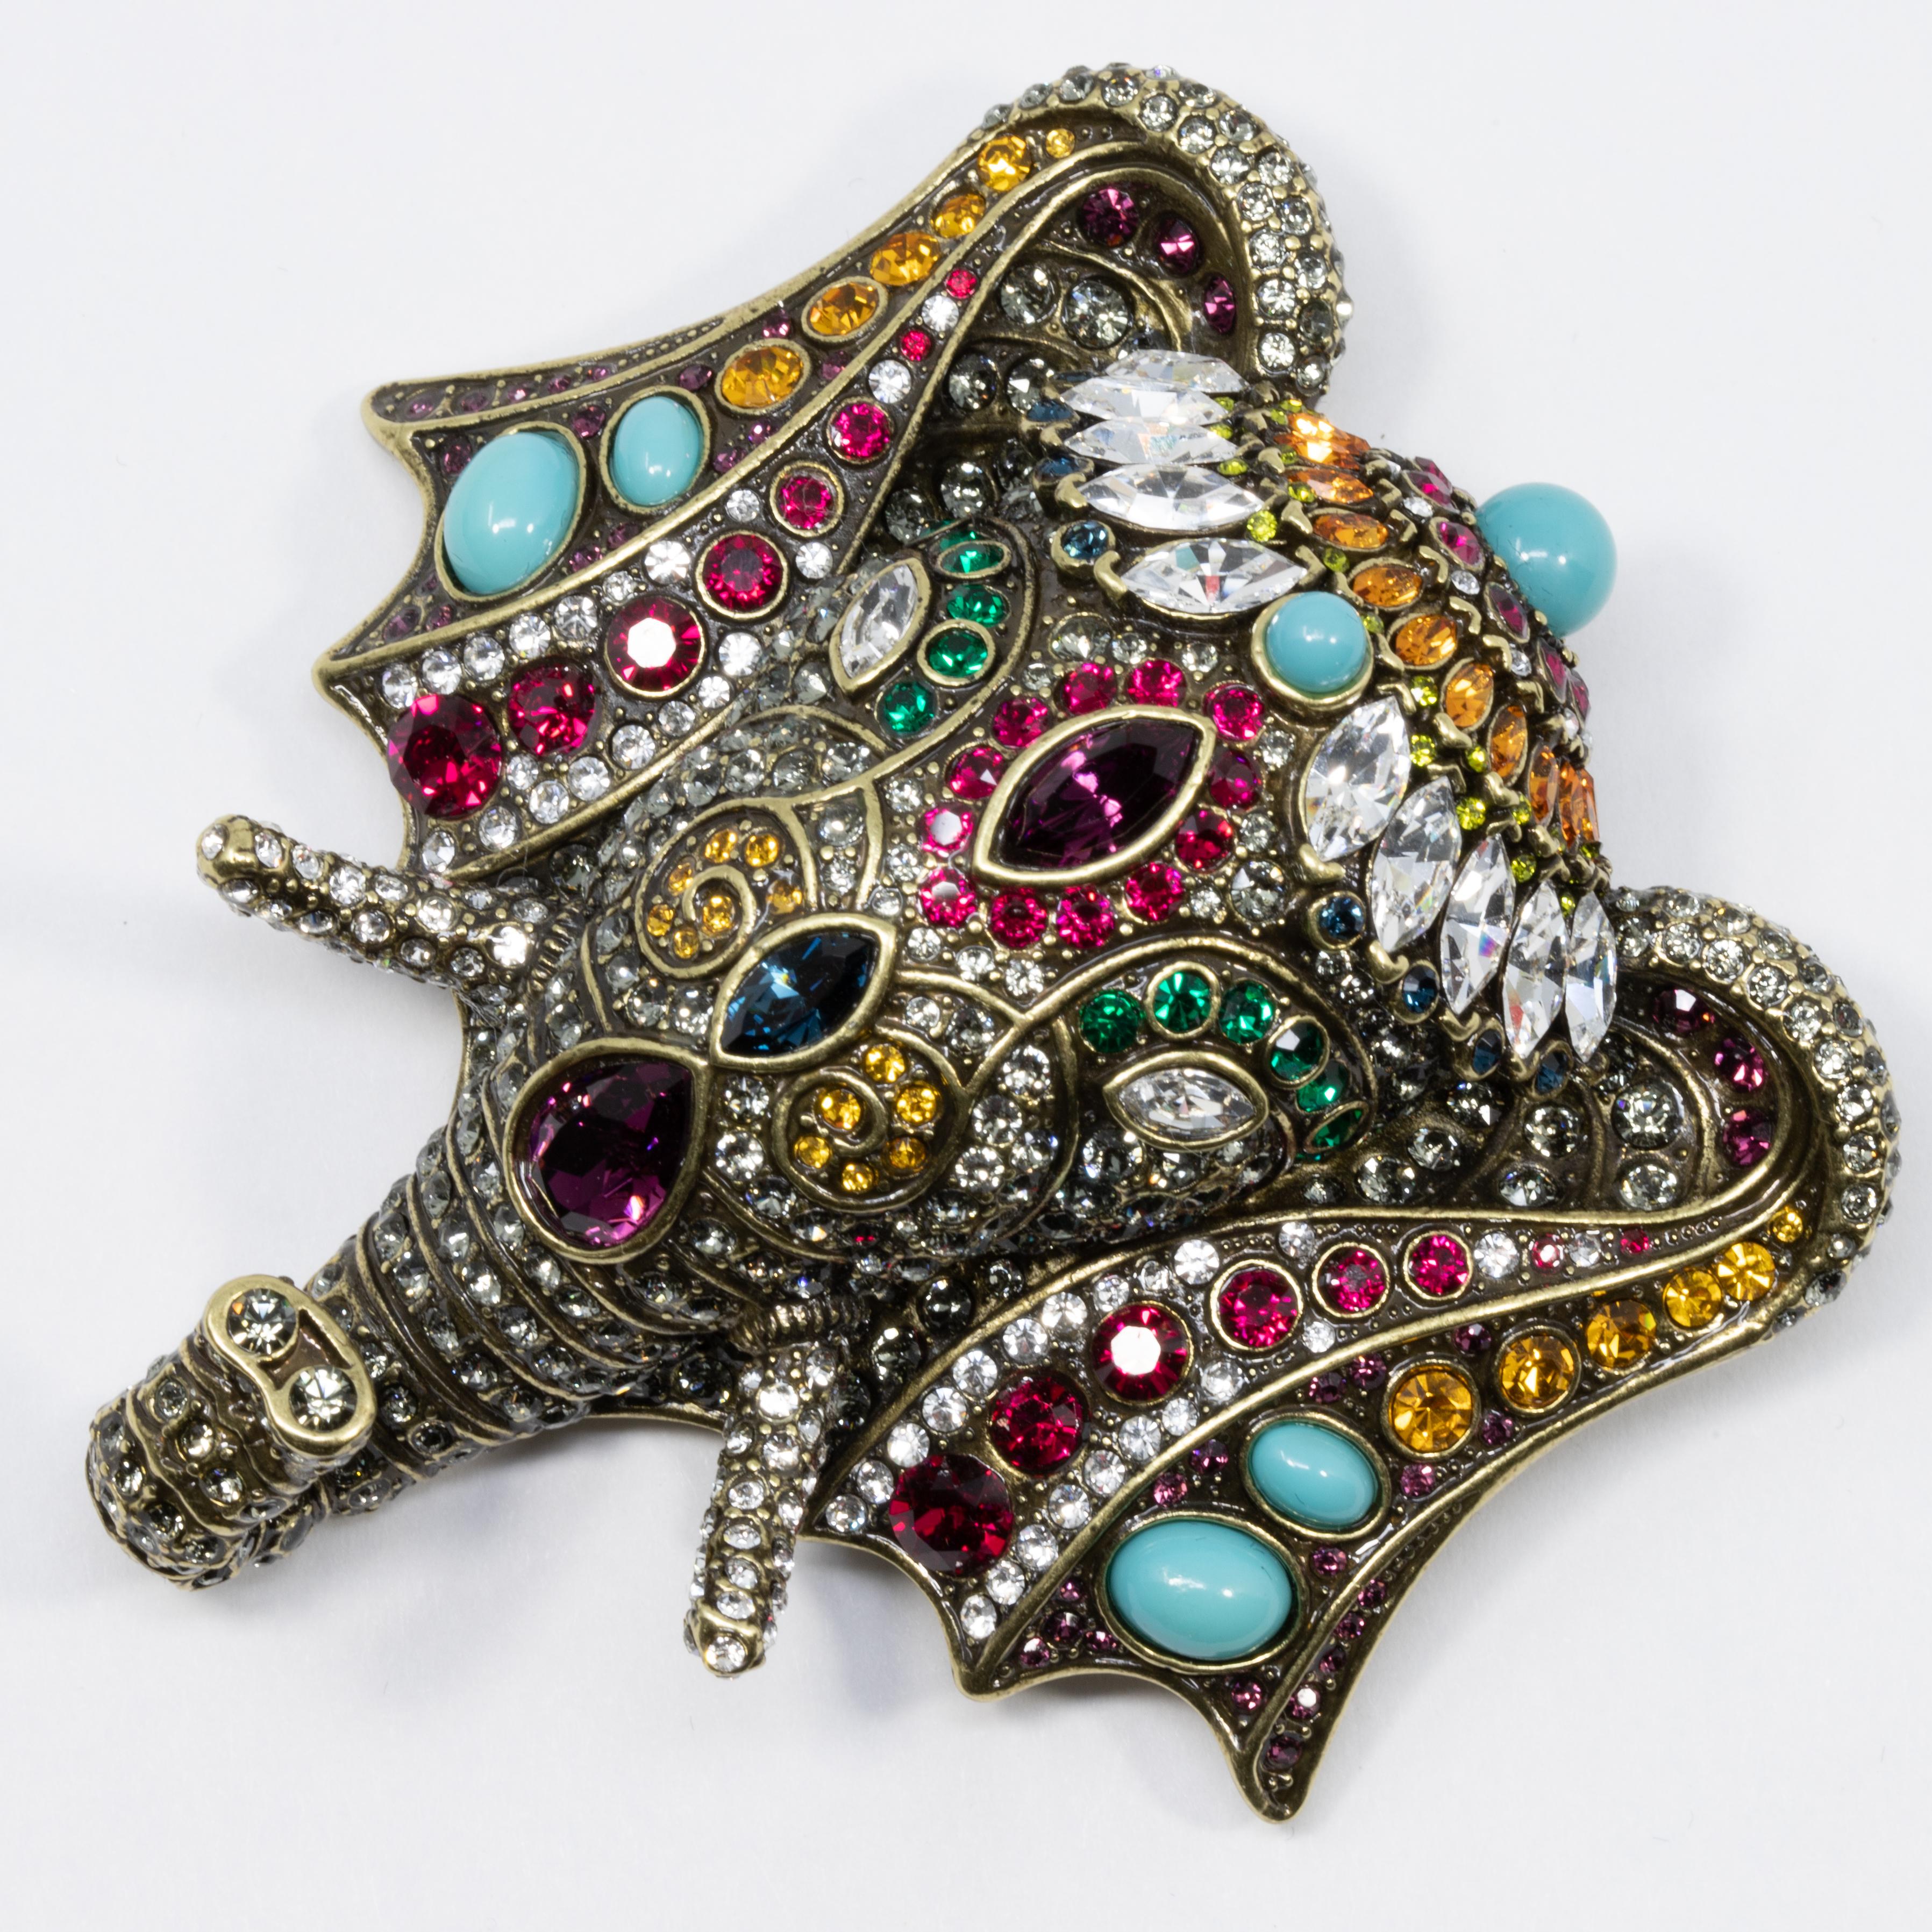 Chic Sheik elephant pin from Heidi Daus. This crystal-encrusted elephant head brooch adds an exotic touch to any style!

Limited-time, retired collection.

Hallmarks: Heidi Daus, CN